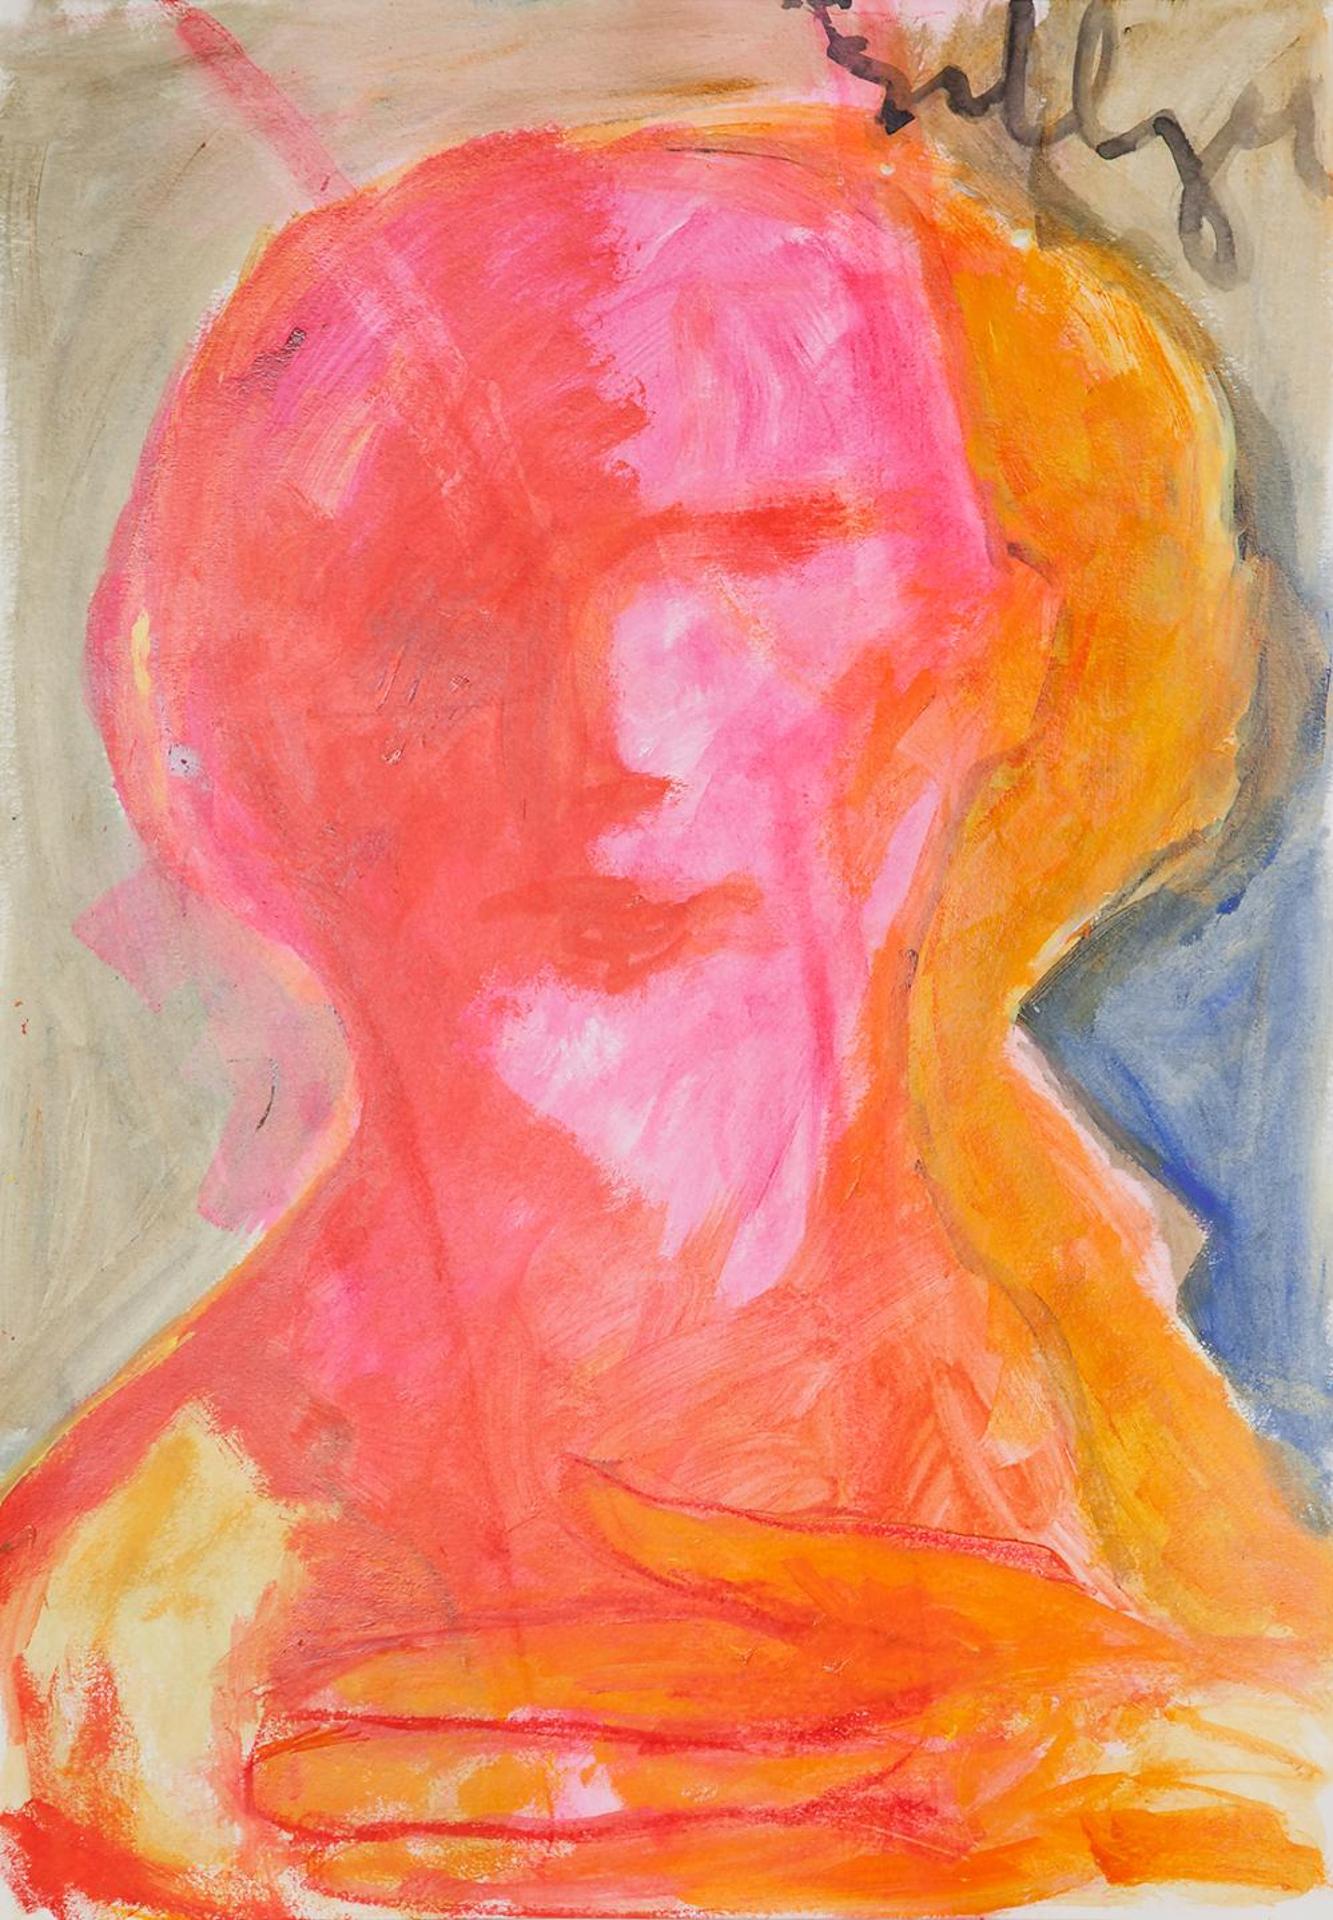 Soozi Schlanger (1953) - Untitled - Guess Who